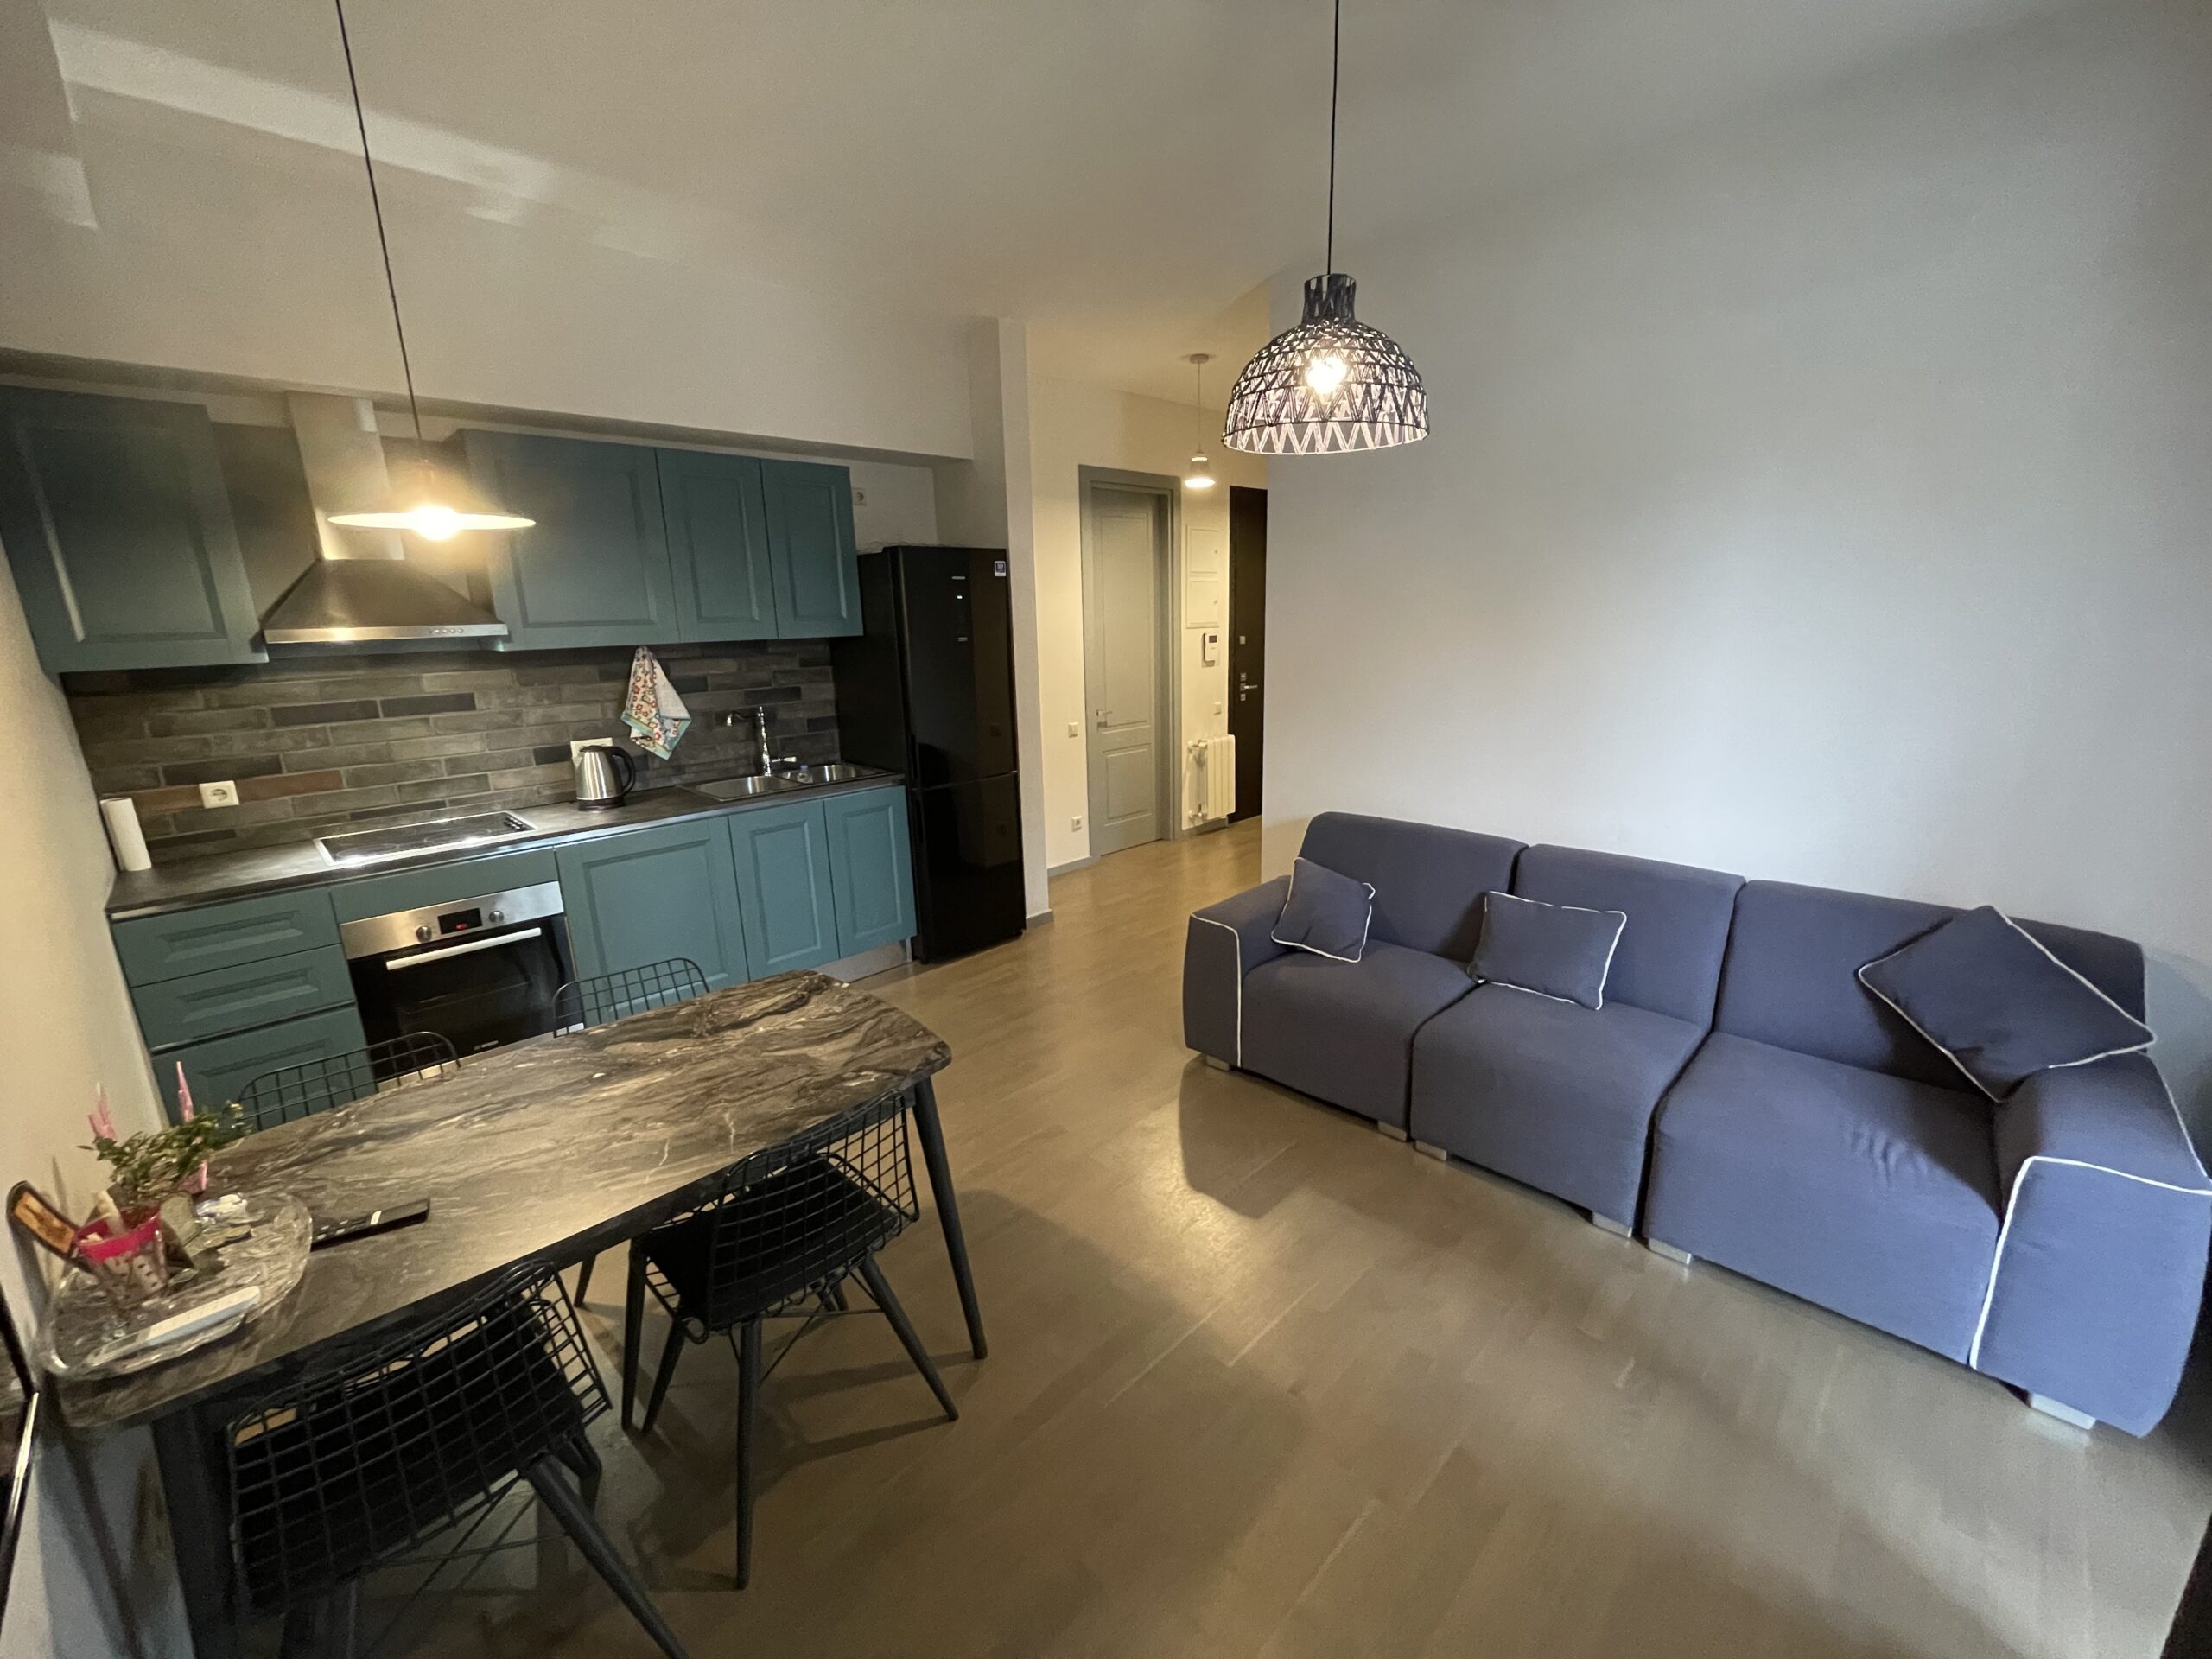 2-Room Apartment For Rent at “m2 on Chavchavadze”